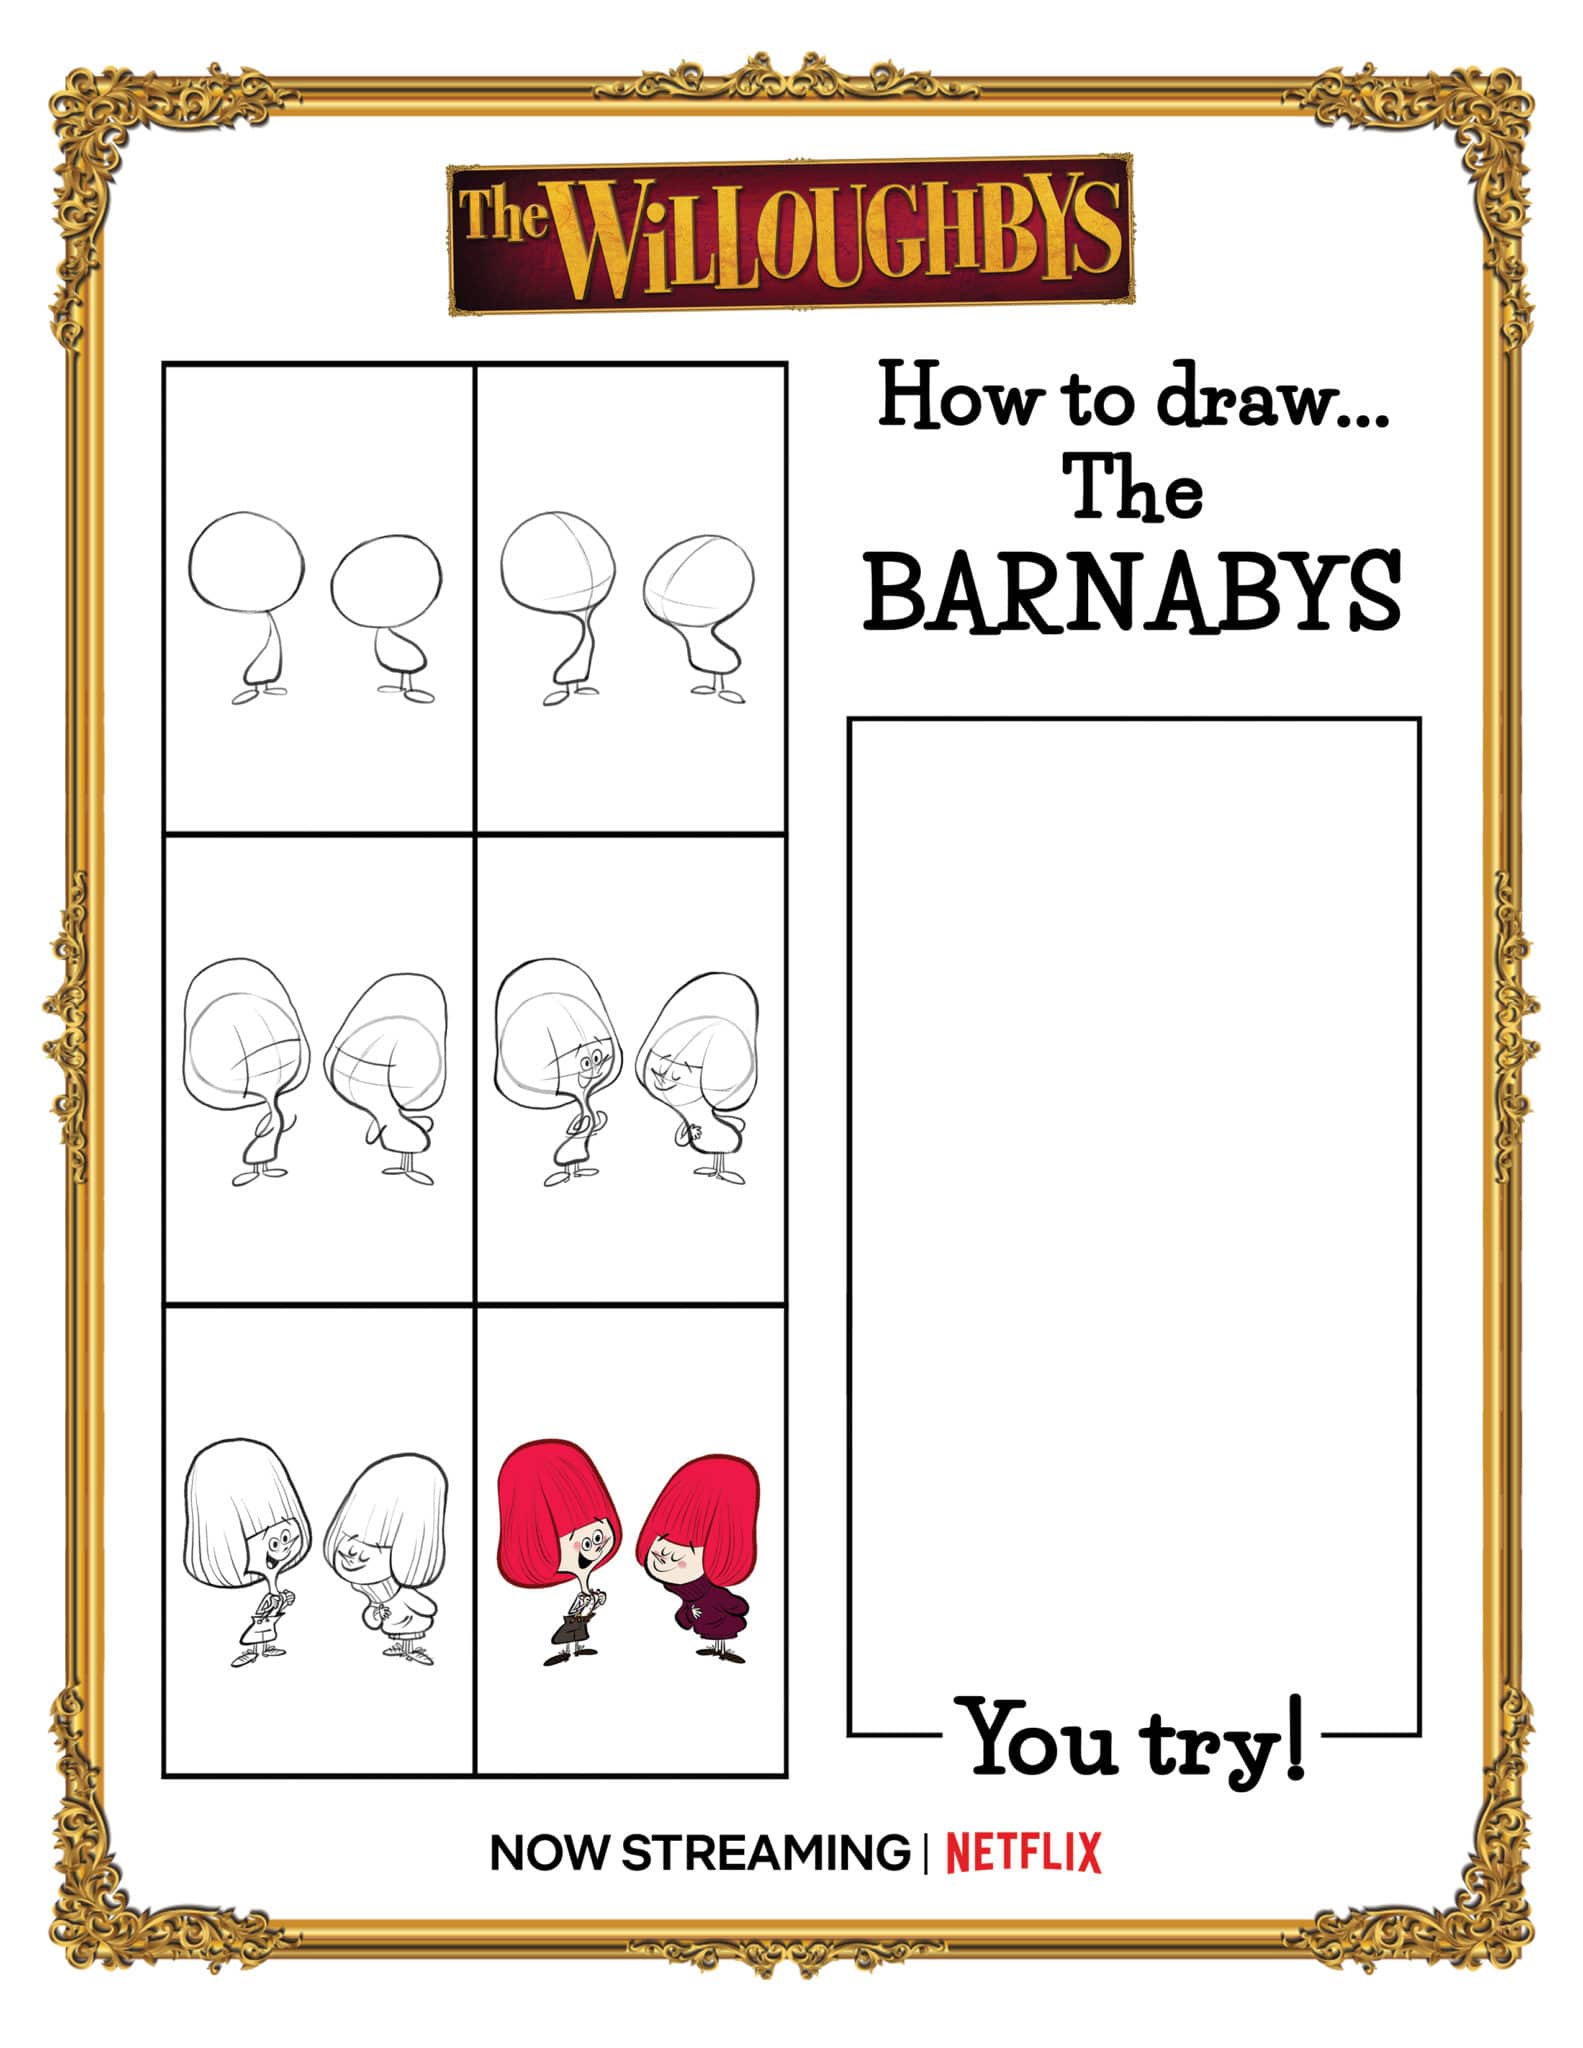 The Willoughbys How To Draw The Barnabys Activity Sheet